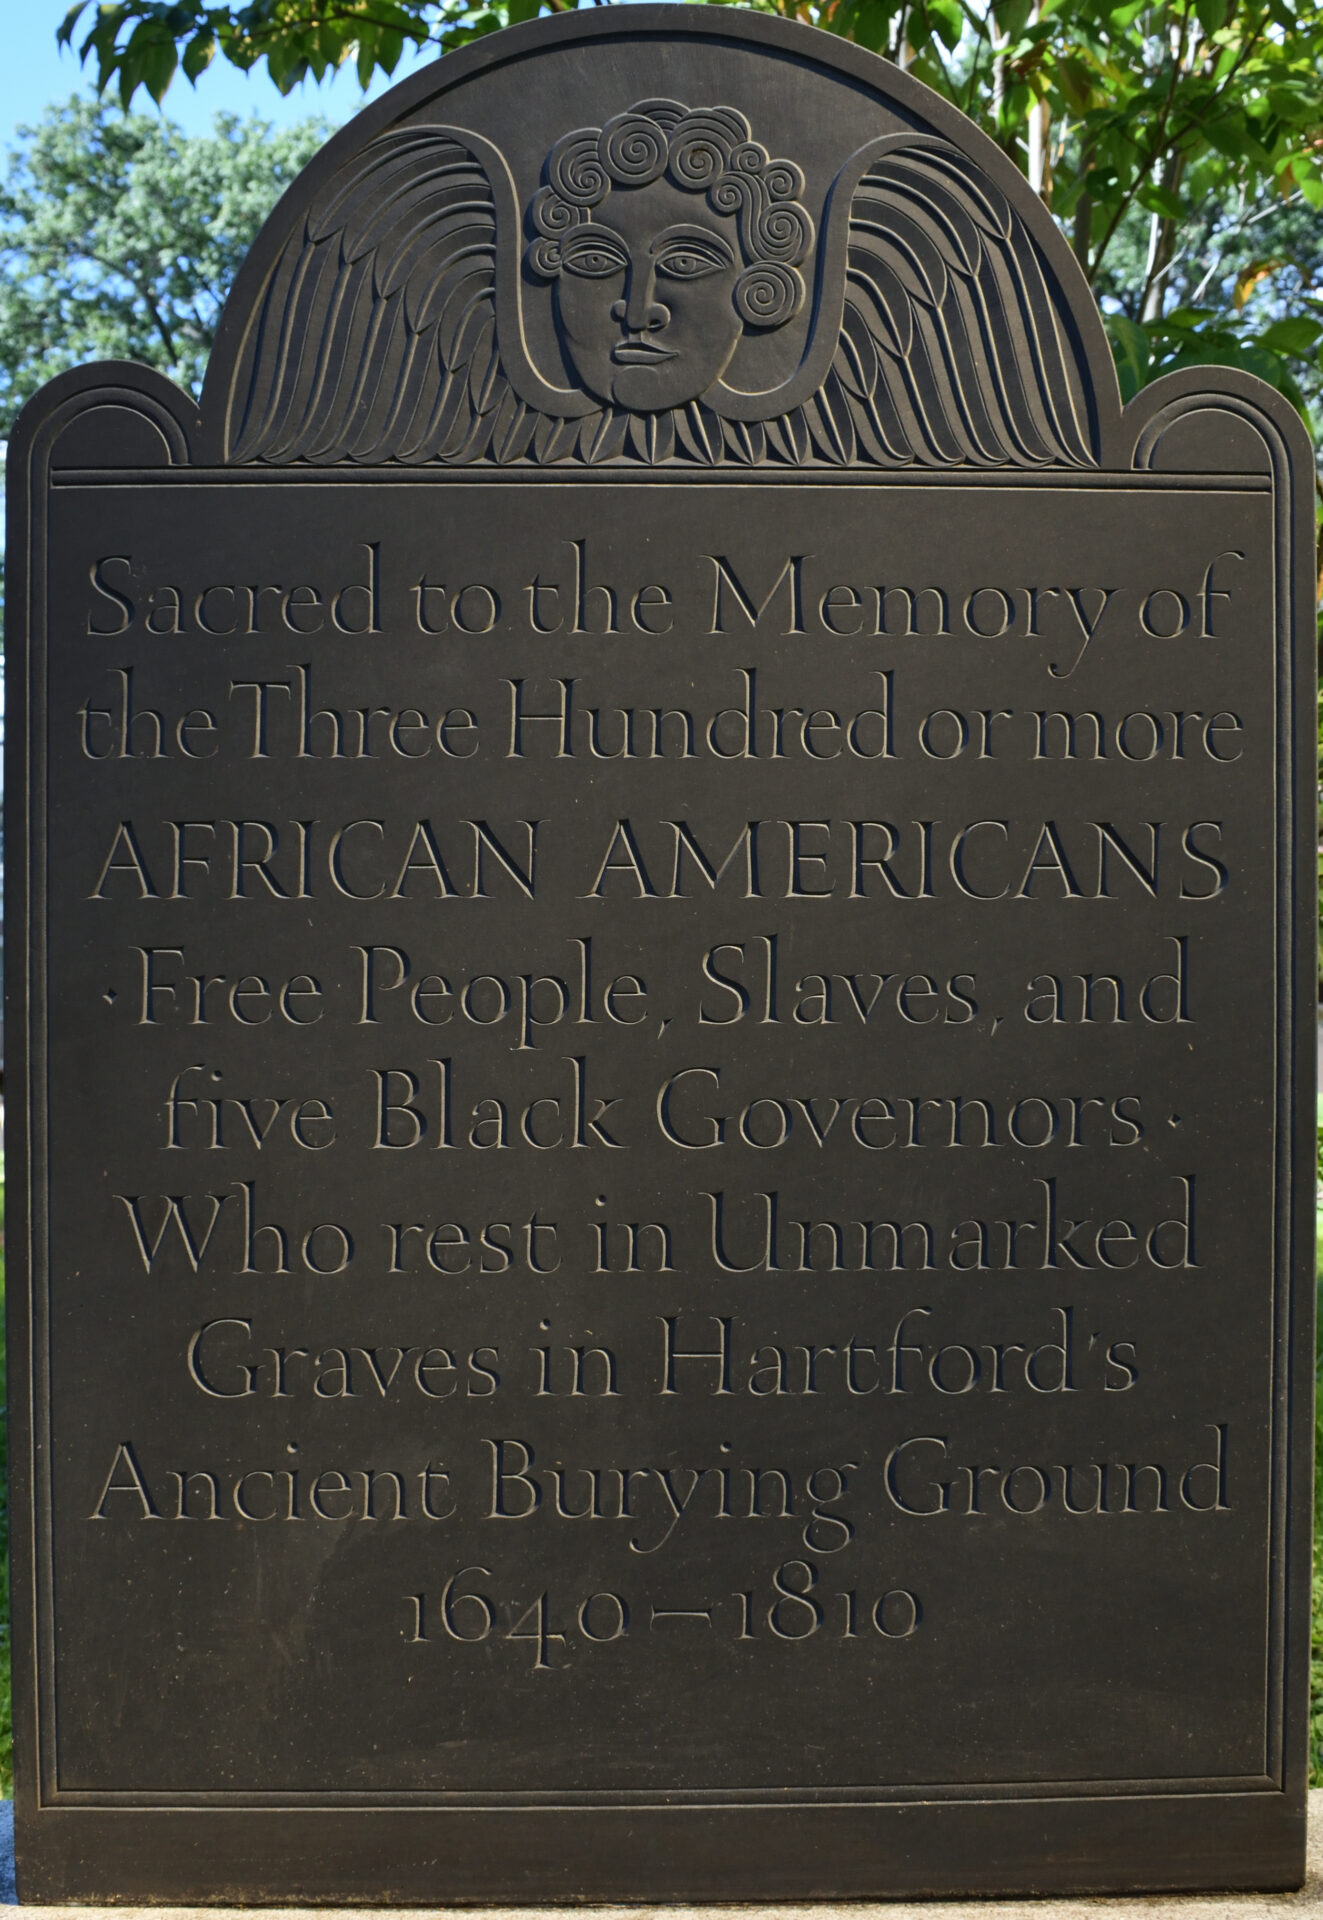 Monument at Hartford's Ancient Burying Ground with inscription that says "Sacred to the Memory of / the Three Hundred or more / AFRICAN AMERICANS / Free People, Slaves, and / five Black Governors / Who rest in Unmarked / Graves in Hartford’s / Ancient Burying Ground / 1604-1810"